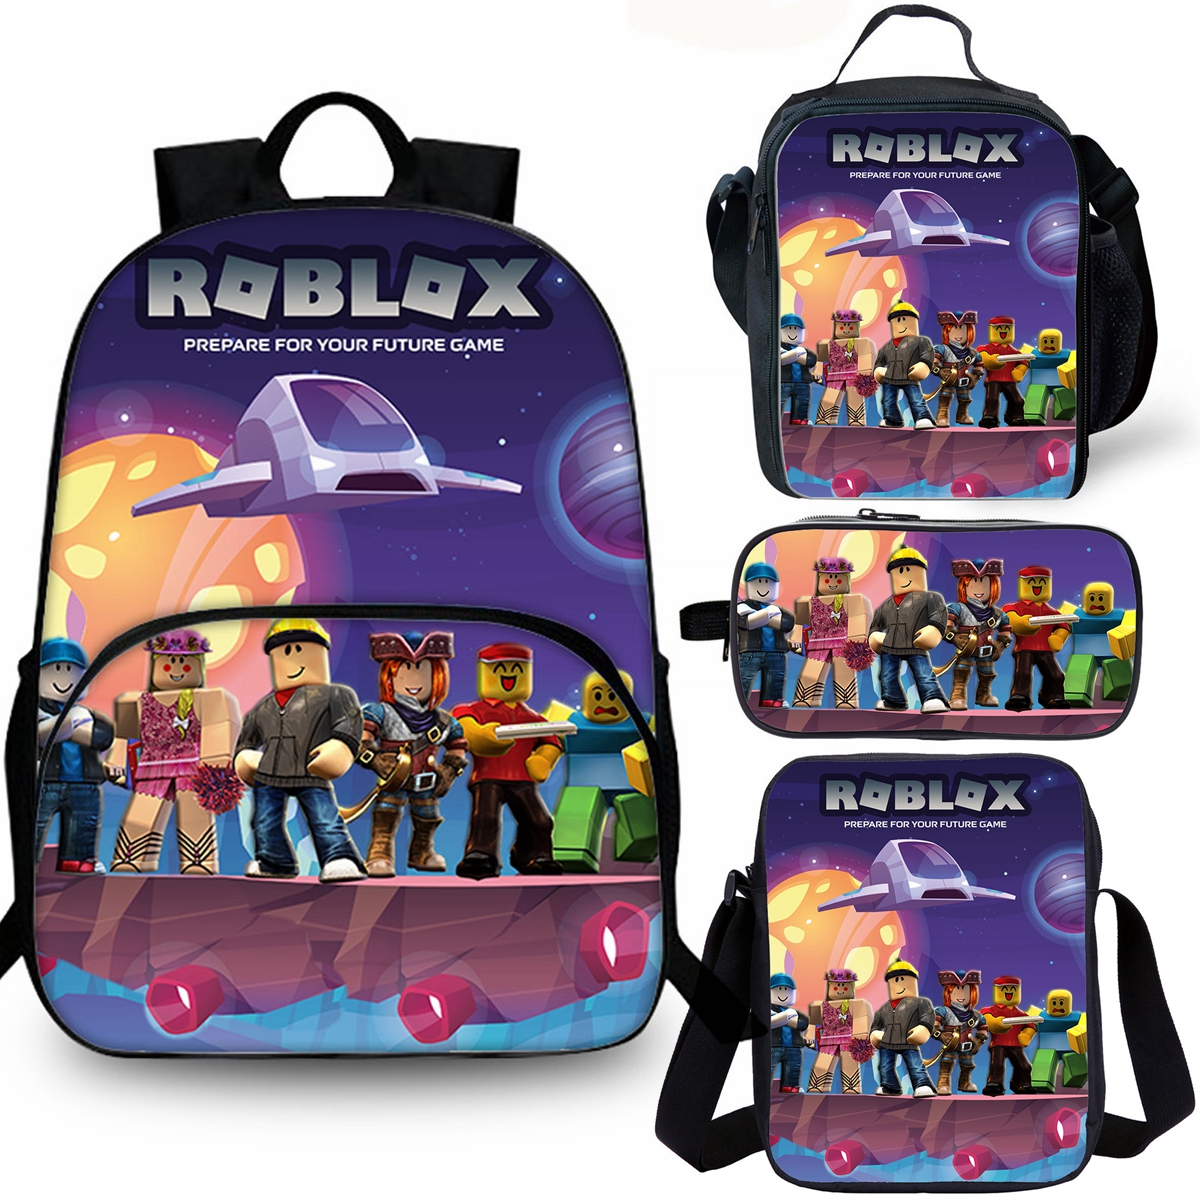 Kids Roblox School Merch 15" Backpack Insulated Lunch Bag Shoulder Bag Pencil Case